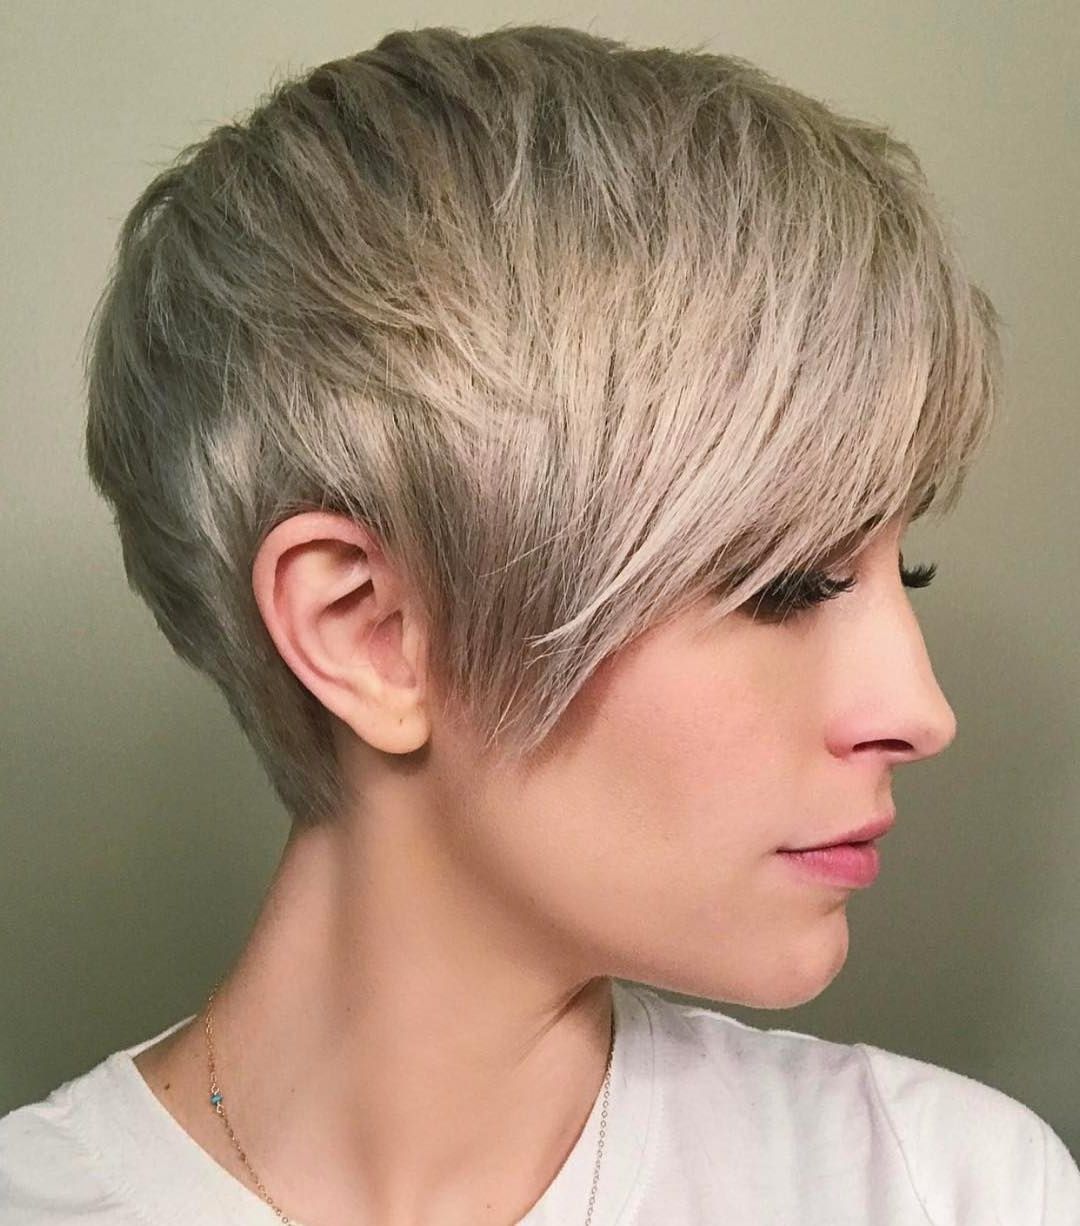 10 Best Short Straight Hairstyle Trends – Women Short Haircut Ideas 2018 For Most Recent Side Parted Blonde Balayage Pixie Haircuts (Photo 7 of 15)